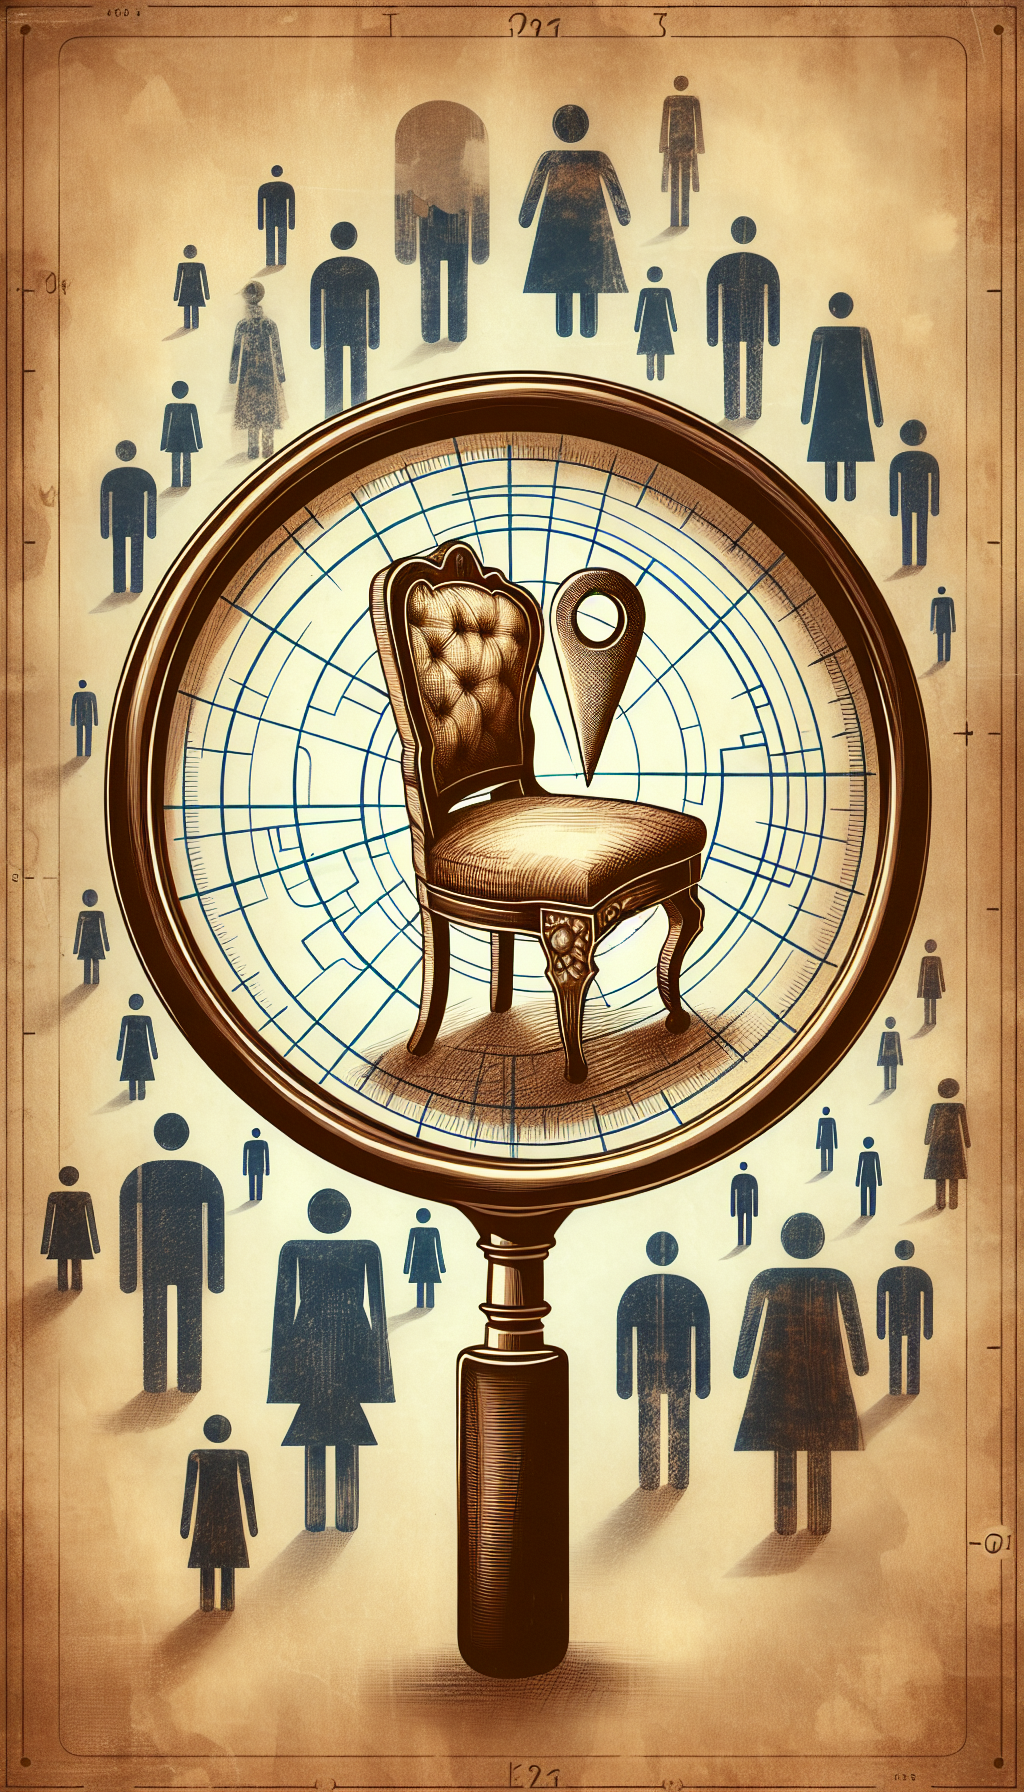 A whimsical, sepia-toned illustration depicts a magnifying glass, within which a vintage map pin is positioned over an elaborate antique chair, the focal treasure. Shadowy figures of appraisers, varying from silhouettes to sketchy outlines, encircle the chair, evoking a radar scanning for experts, blending the nostalgia of antiques with the modern quest for proximity.